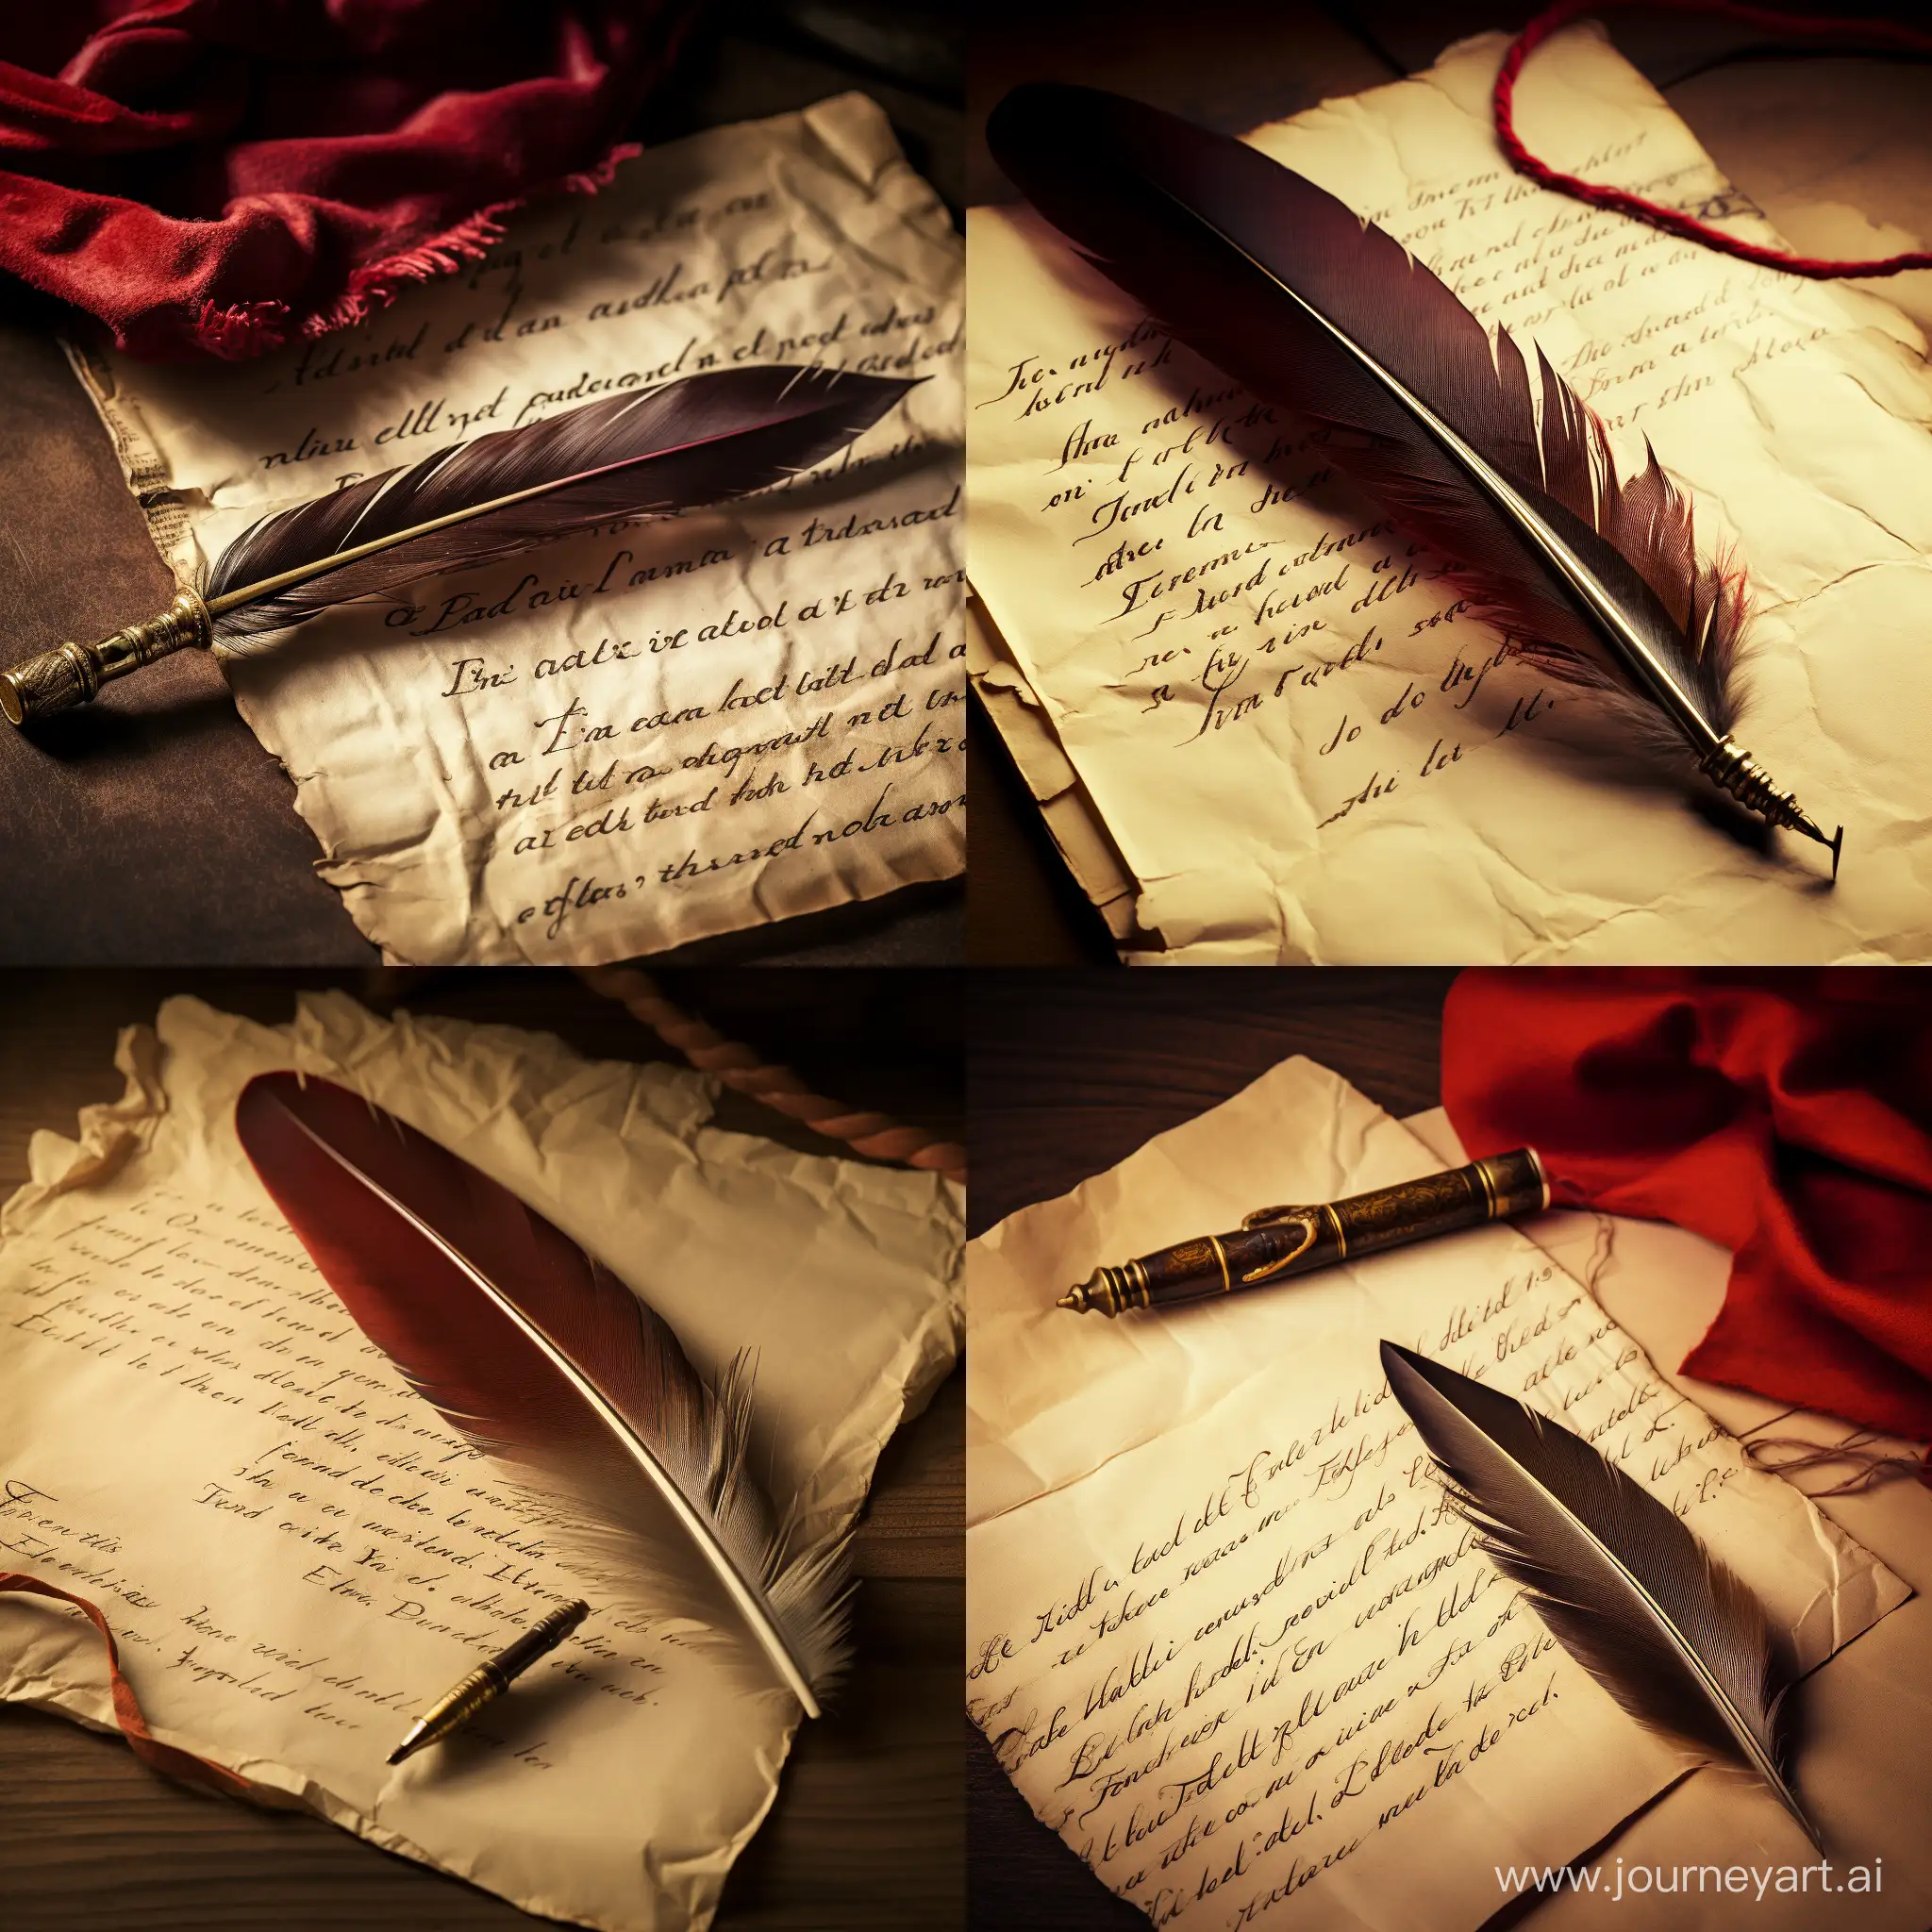 An old letter with "End of the Term" written on it and a quill next to it, very retro style, just a close-up of the letter